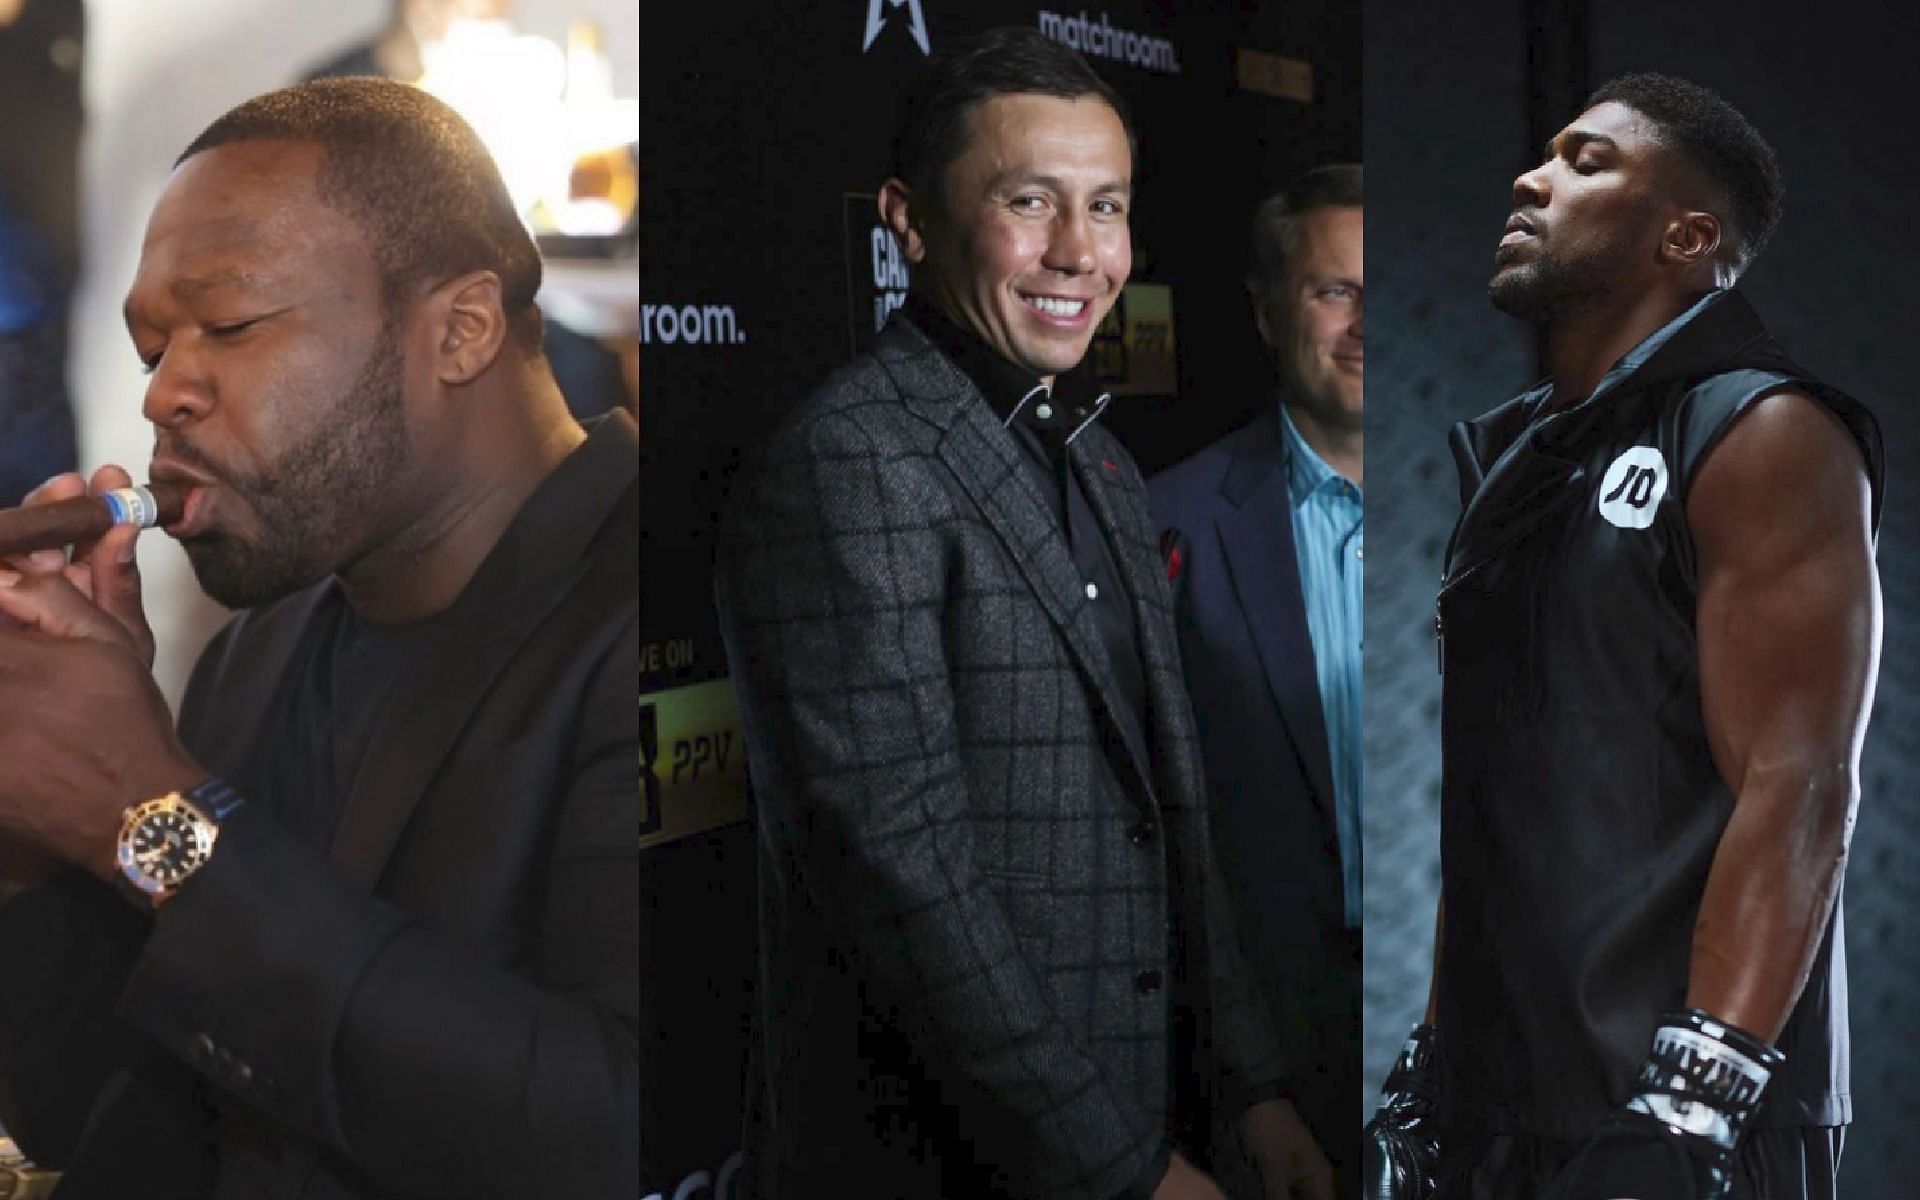 From (R-L): Anthony Joshua (@anthonyjoshua) // Gennadiy Golovkin // 50 Cent (@50cent) // [Images courtesy of Instagram and Getty]